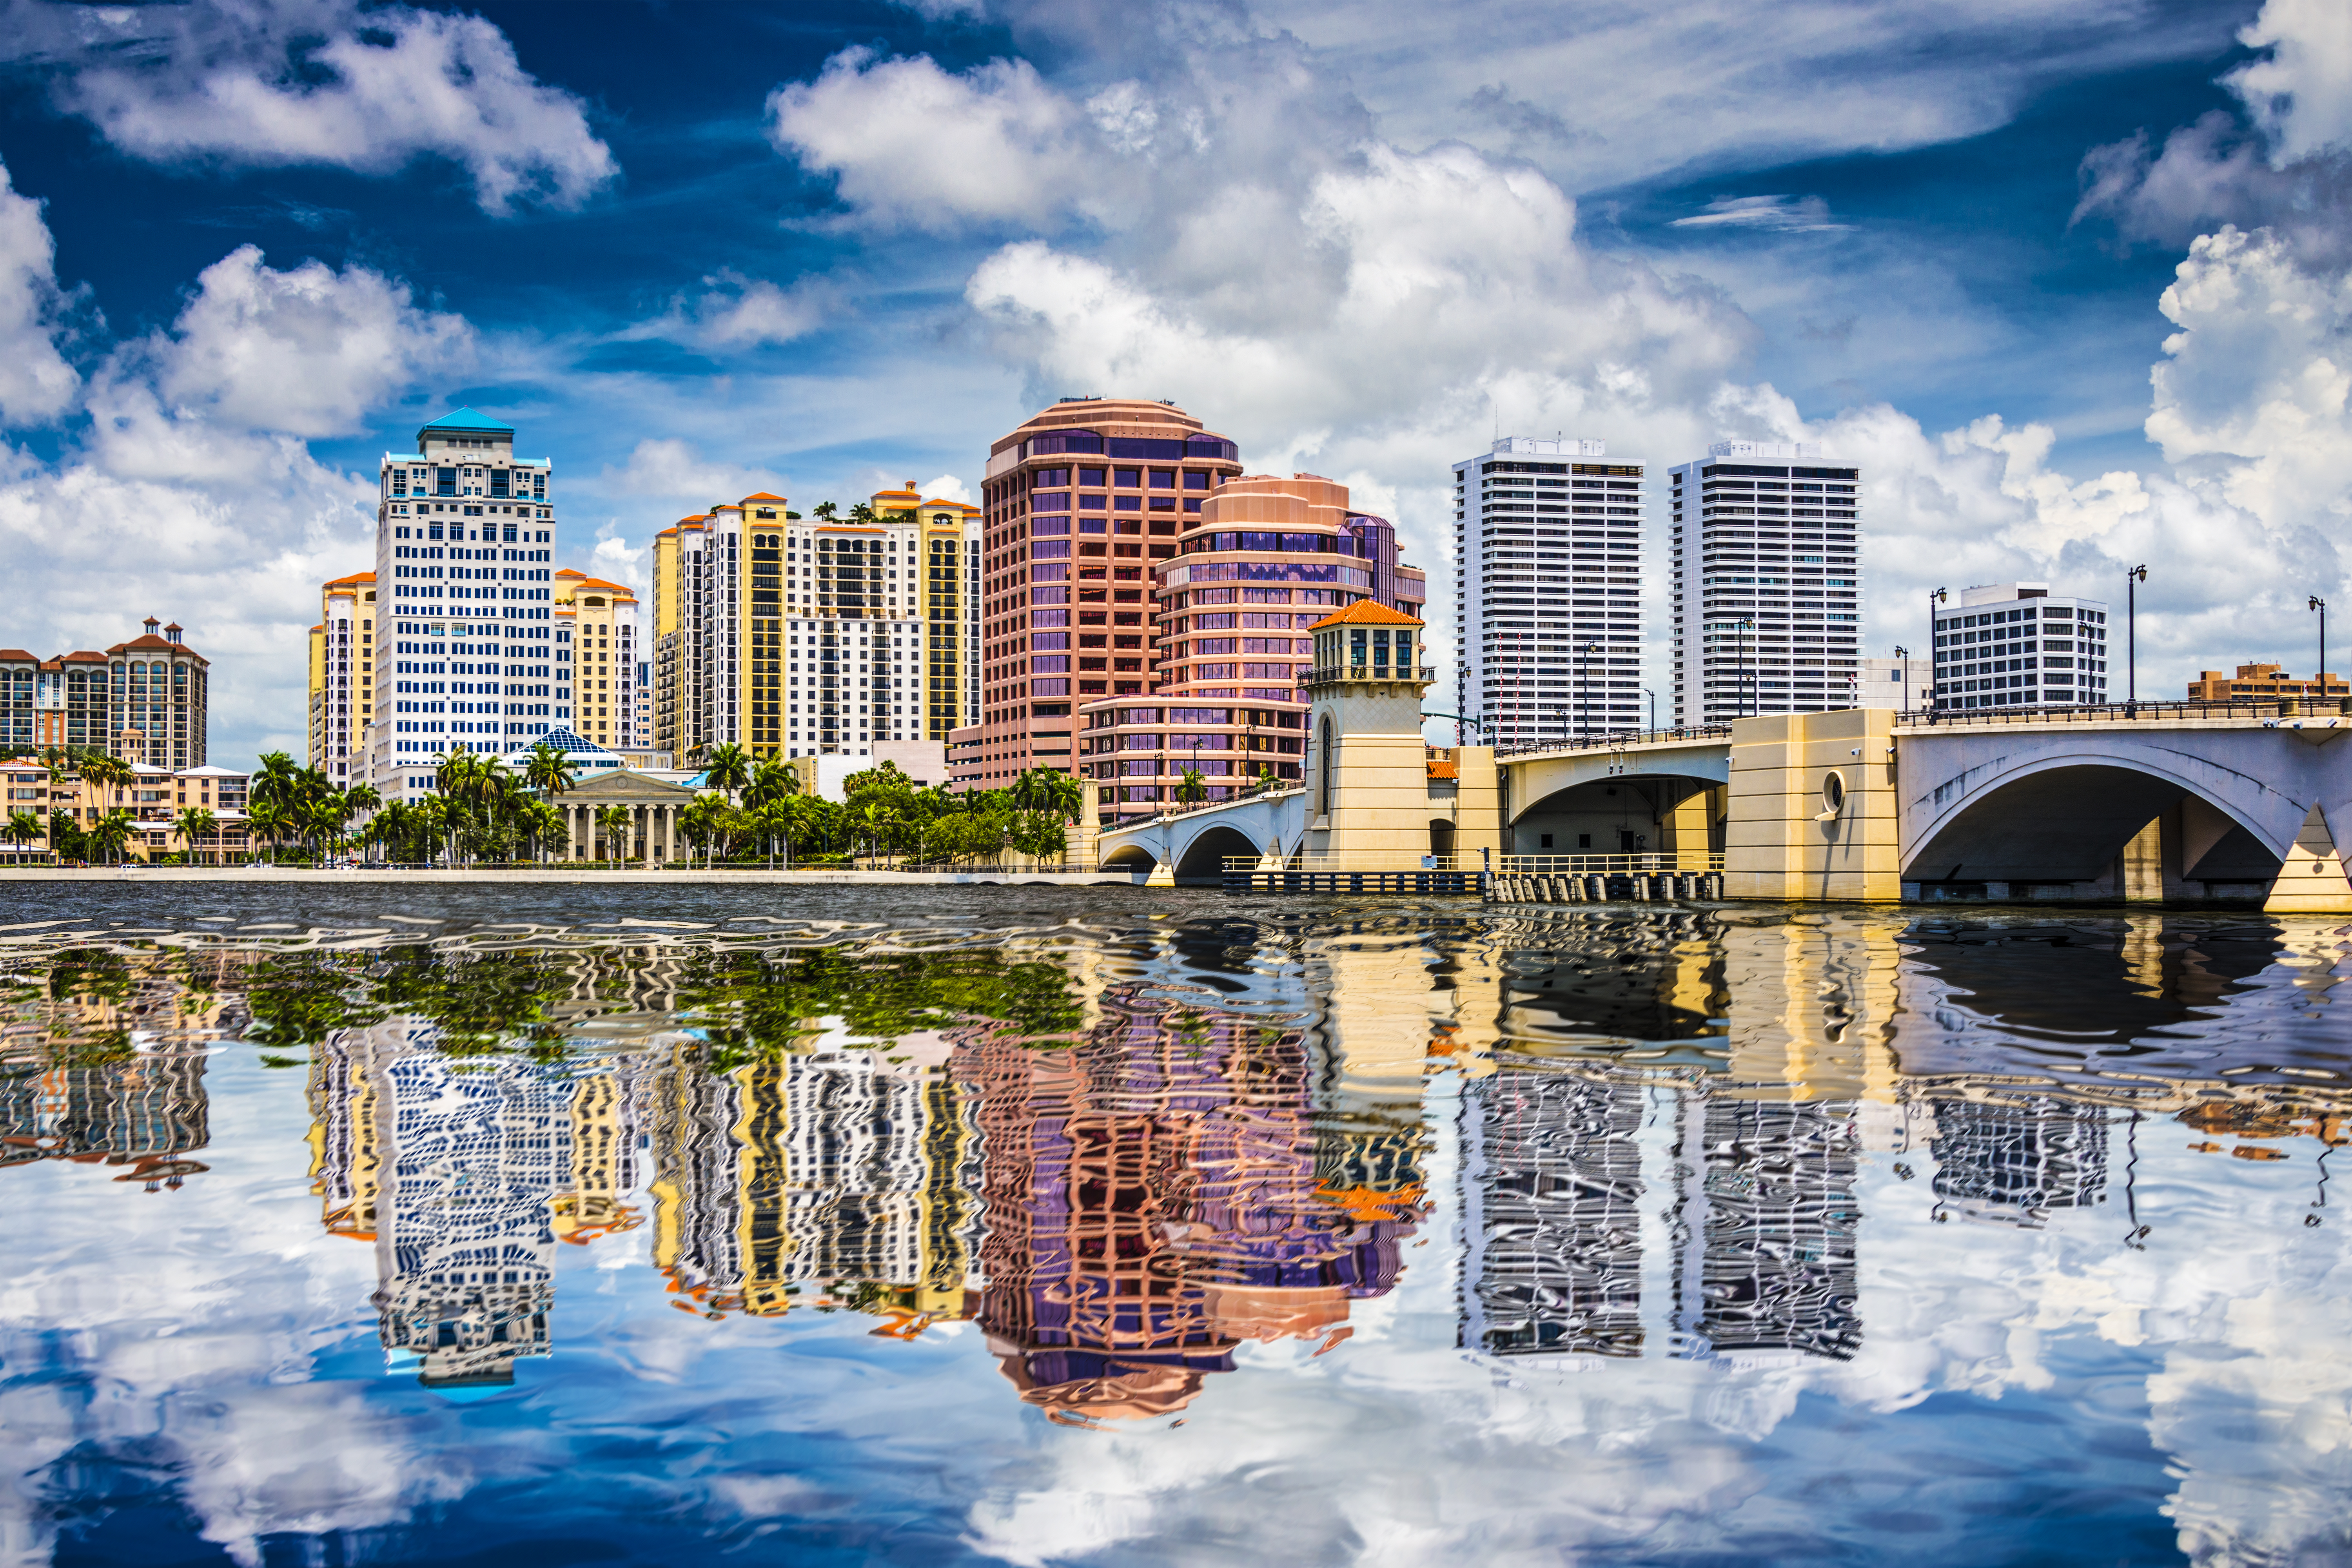 Downtown WPB-reflection image